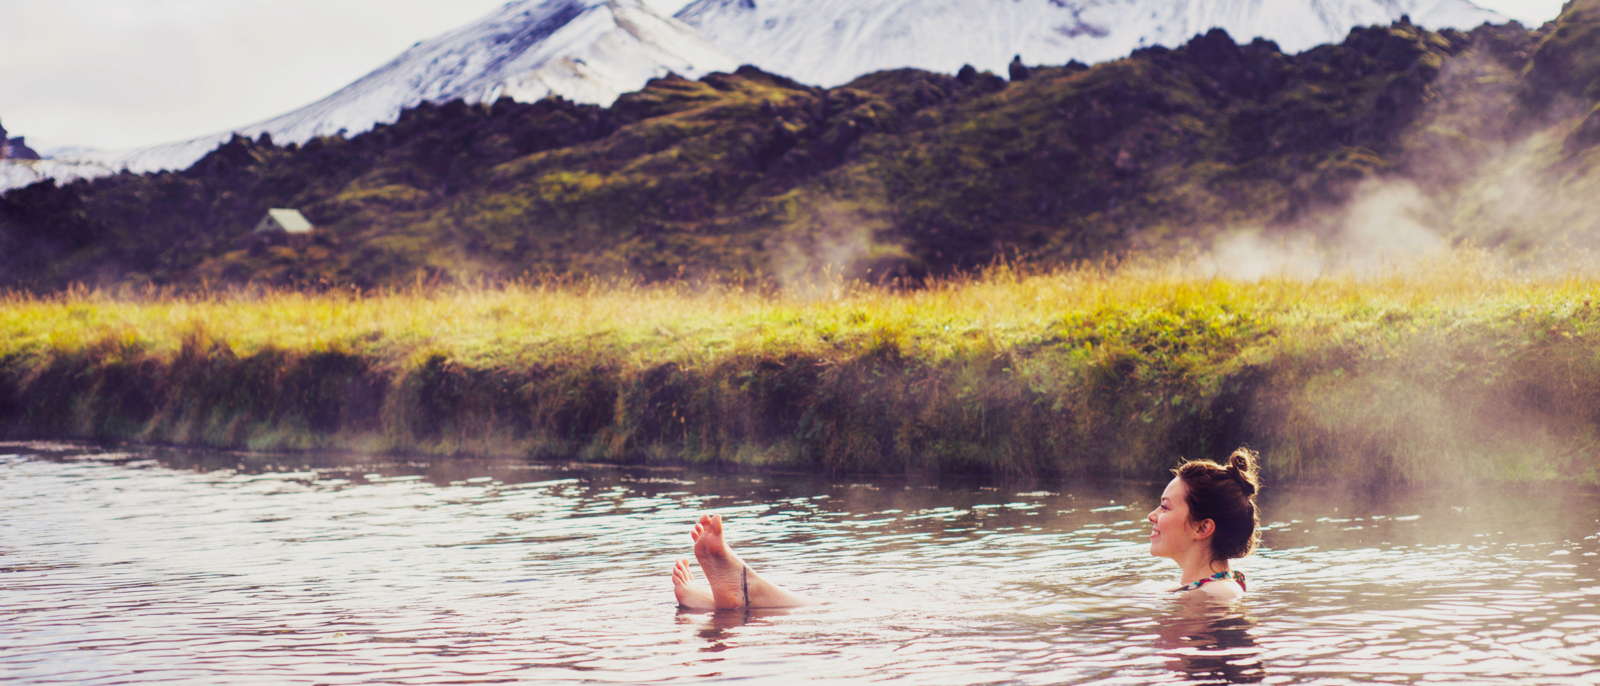 Girl in a hot spring in Iceland Landmannalaugar. Relaxing in a natural hot bath